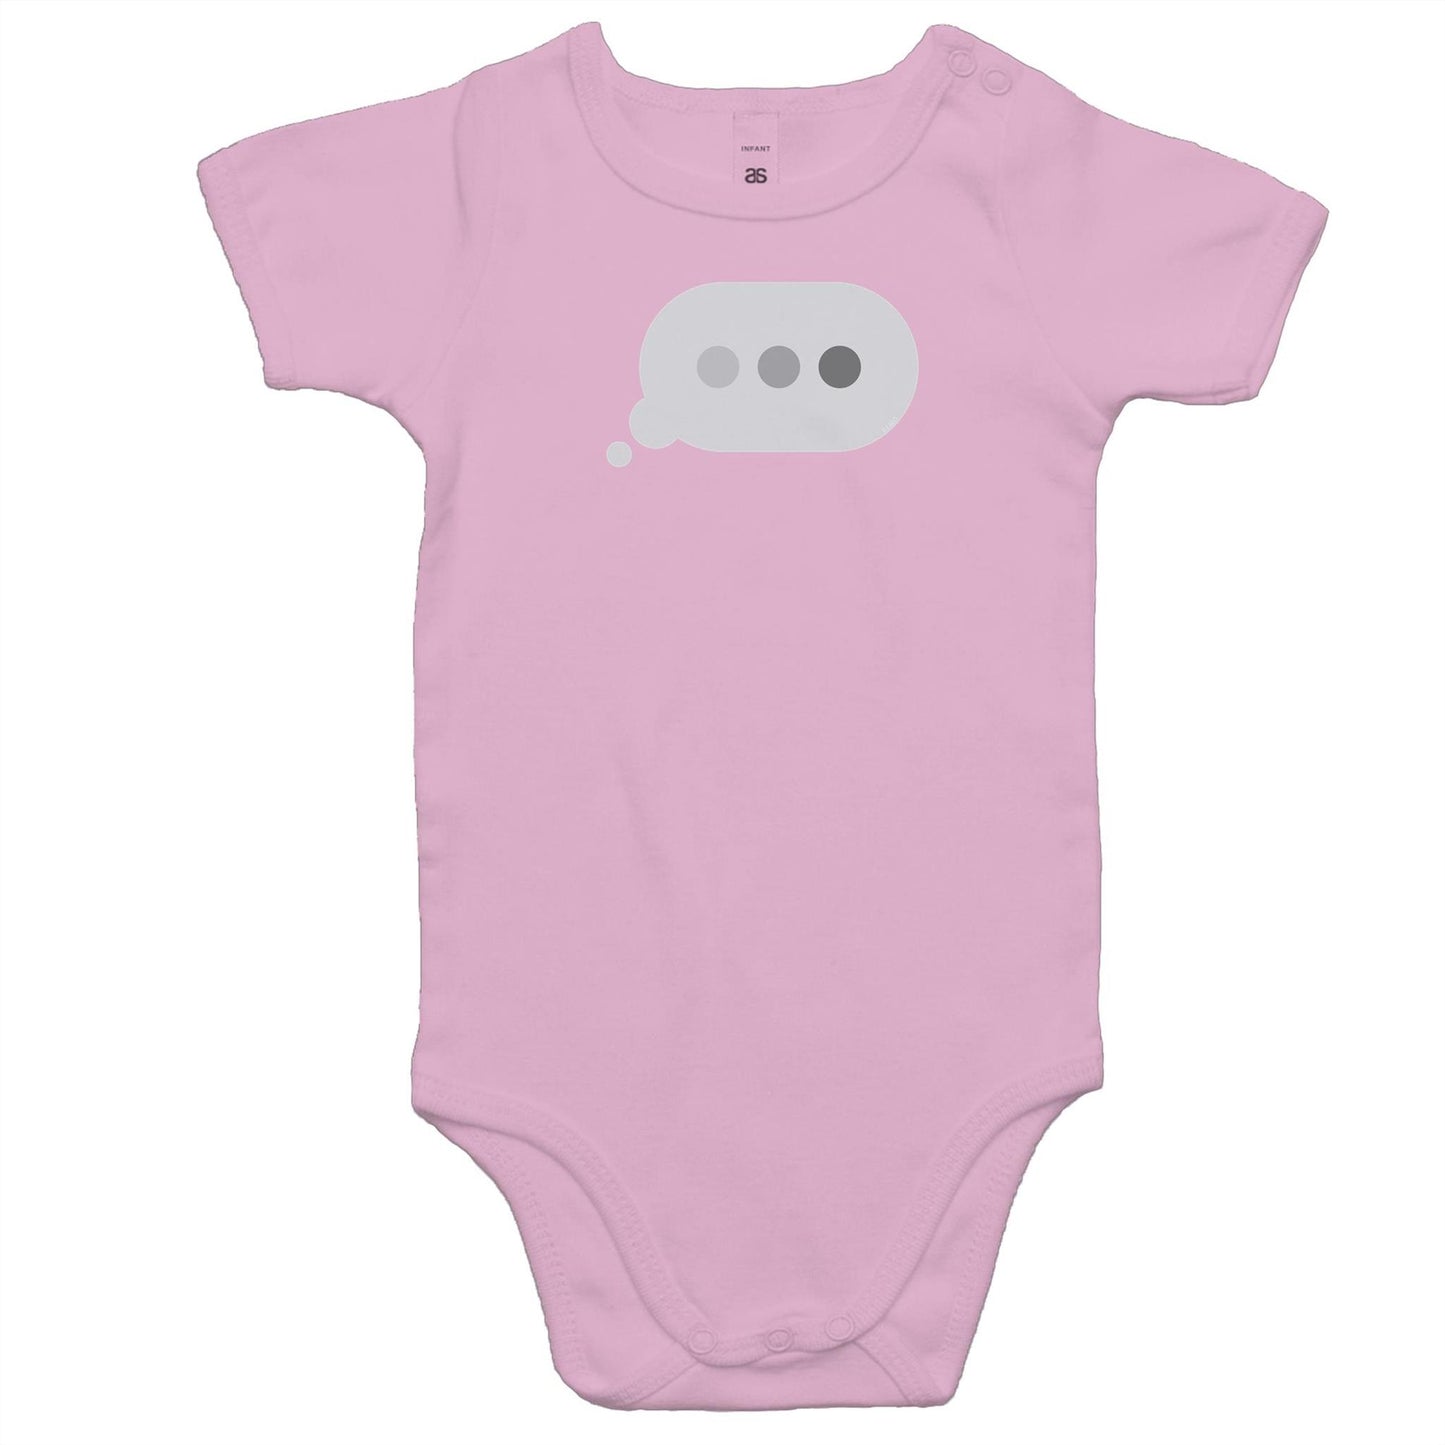 Typing Indicator Rompers for Babies